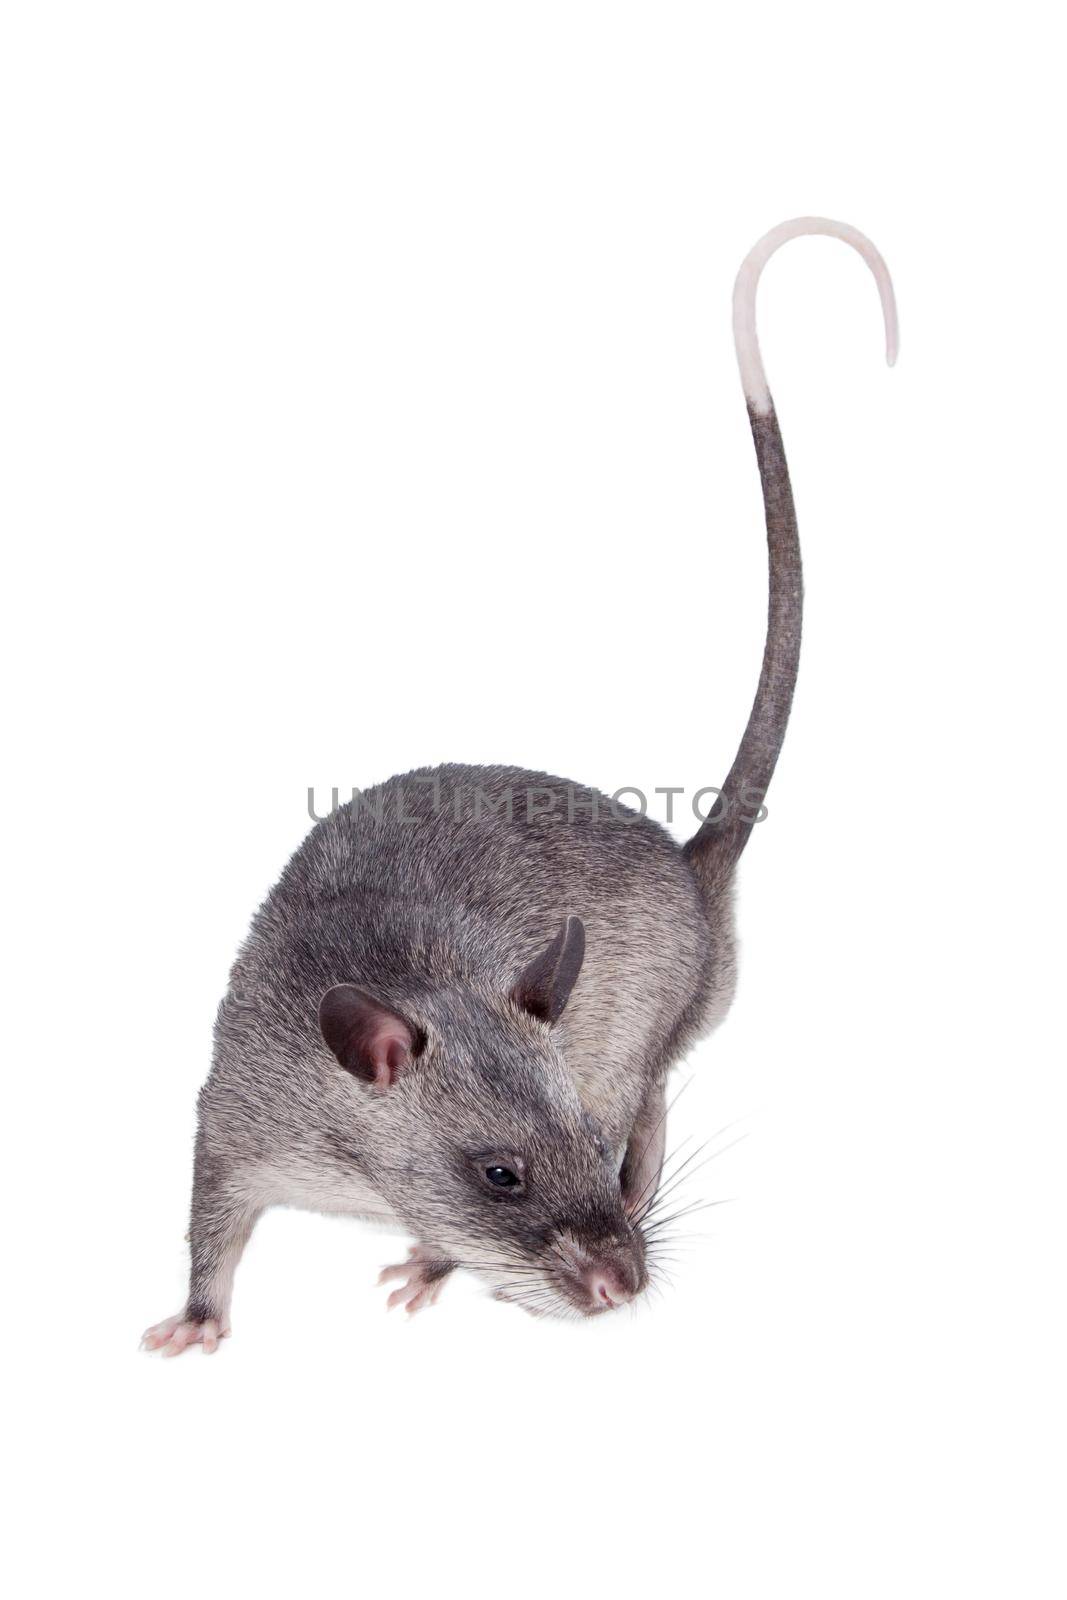 Gambian pouched rat, 3 month old, on white by RosaJay